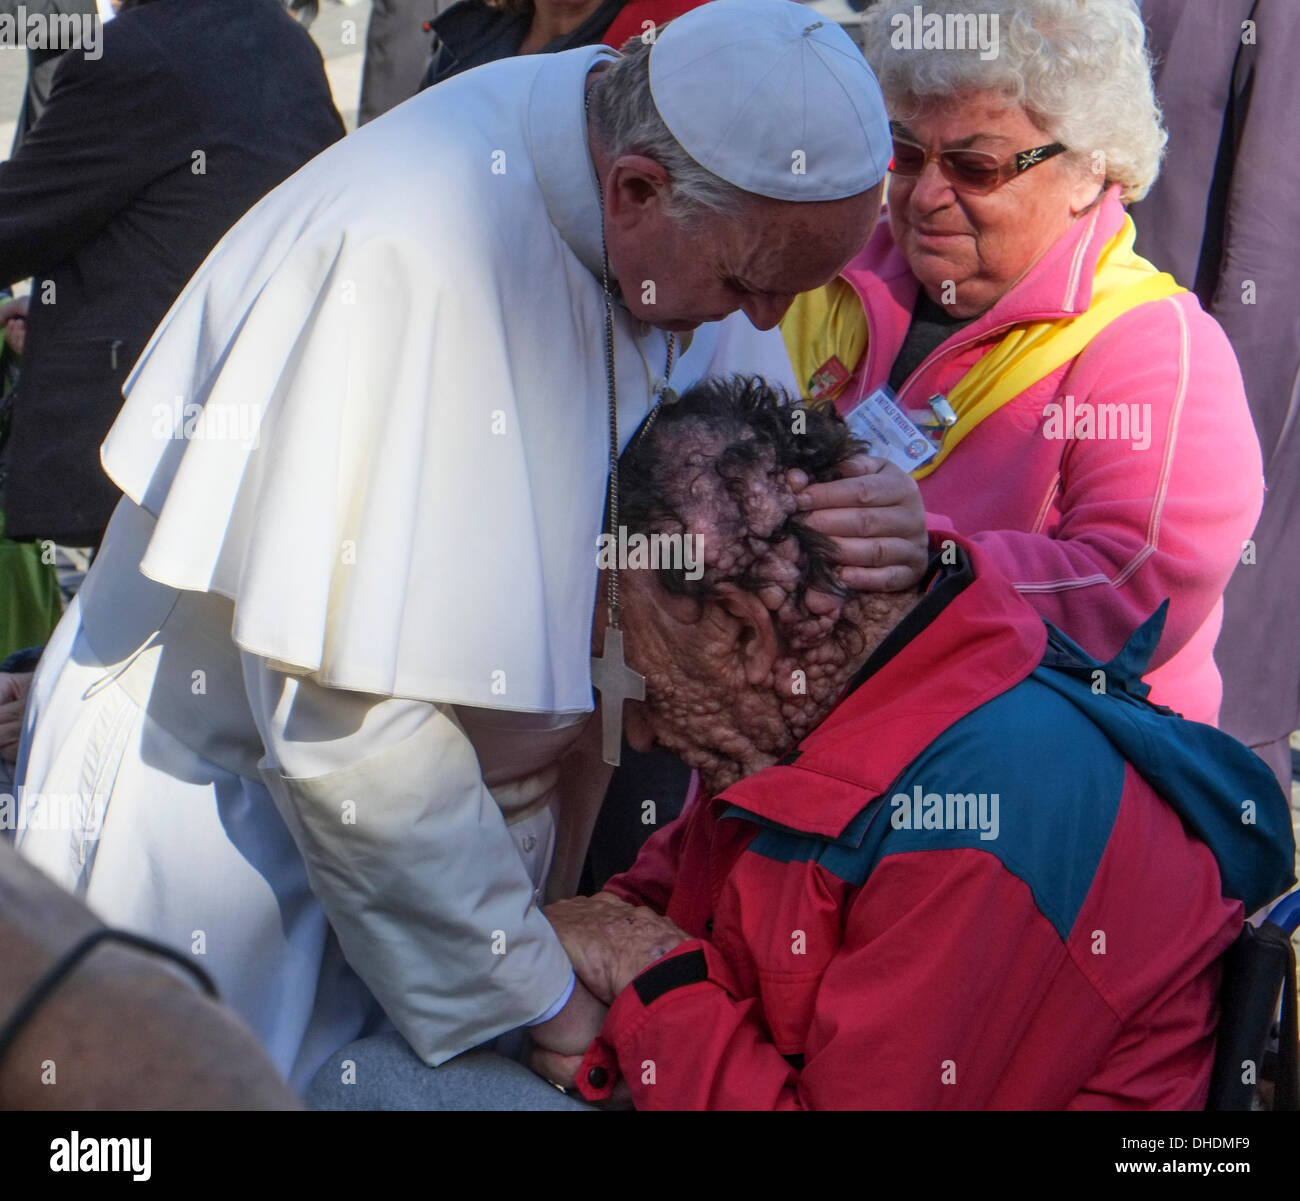 Vatican, Rome, Italy. 06th Nov, 2013. Vatican Pope Francis, general audience 06 November 2013 Pope Francis hug and bless a person sick of neurofibromatosis during the general audience of 6 November in St Peter square © Realy Easy Star/Alamy Live News Stock Photo